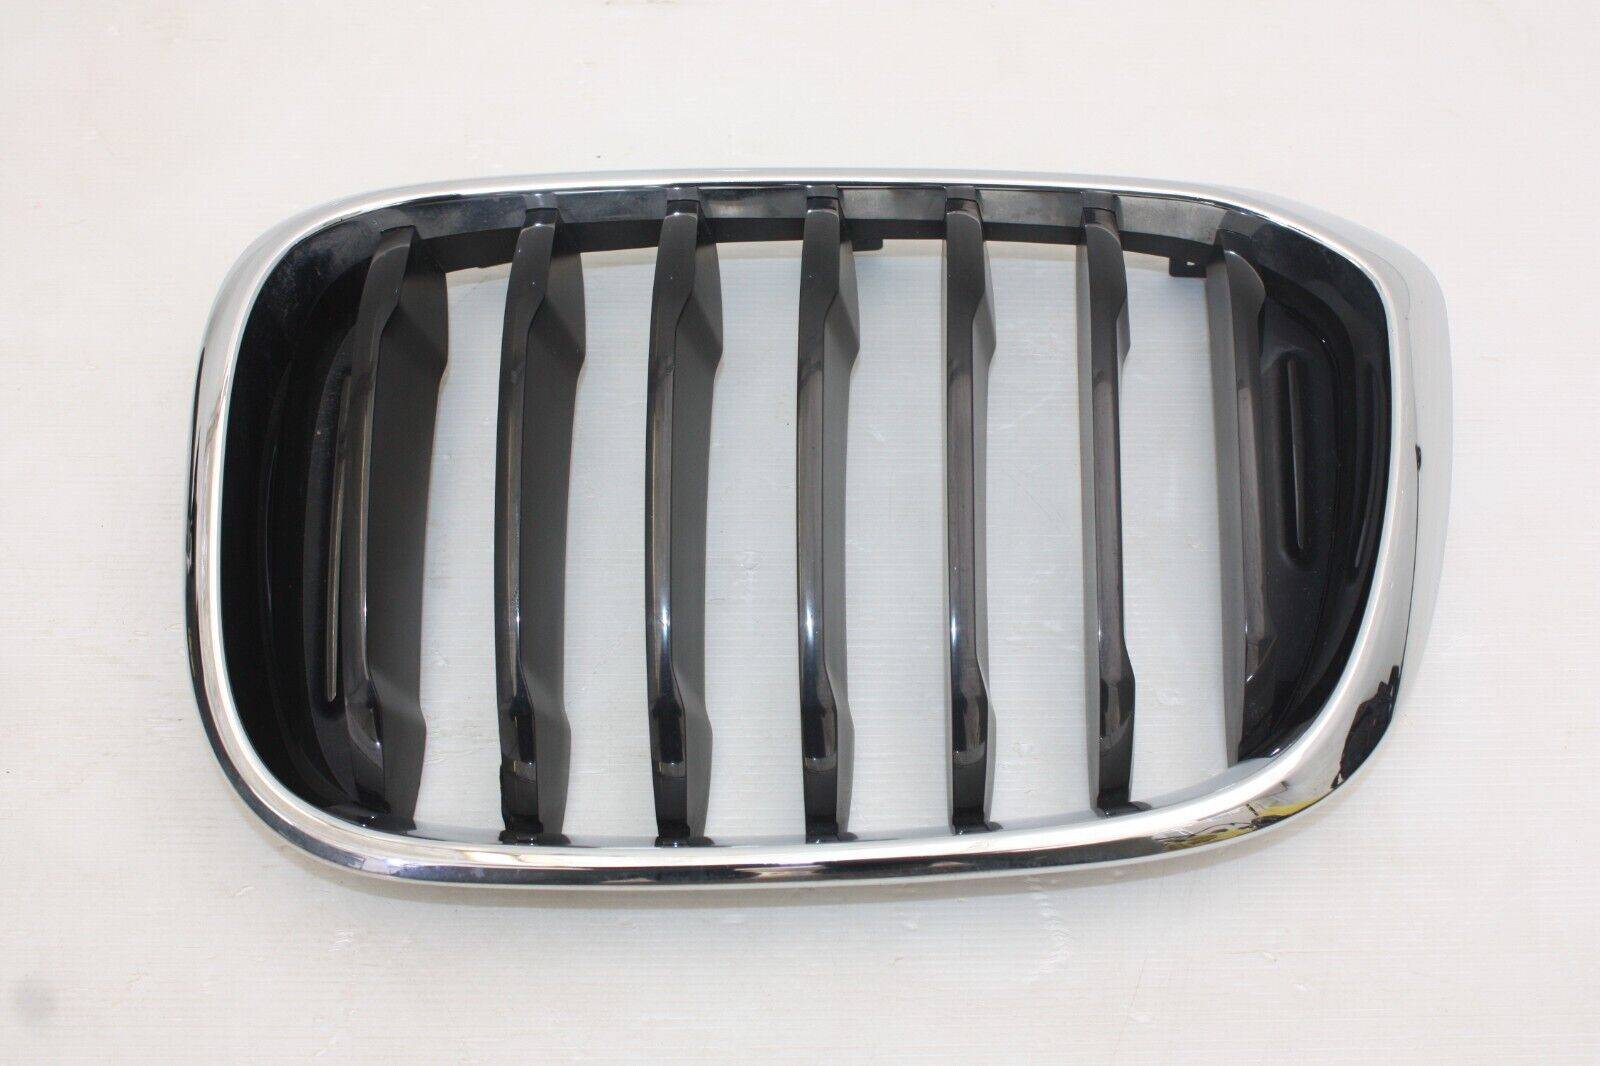 BMW X3 X4 G02 G01 Front Bumper Left Kidney Grill 2017 TO 2021 8091725 DAMAGED 175648267066